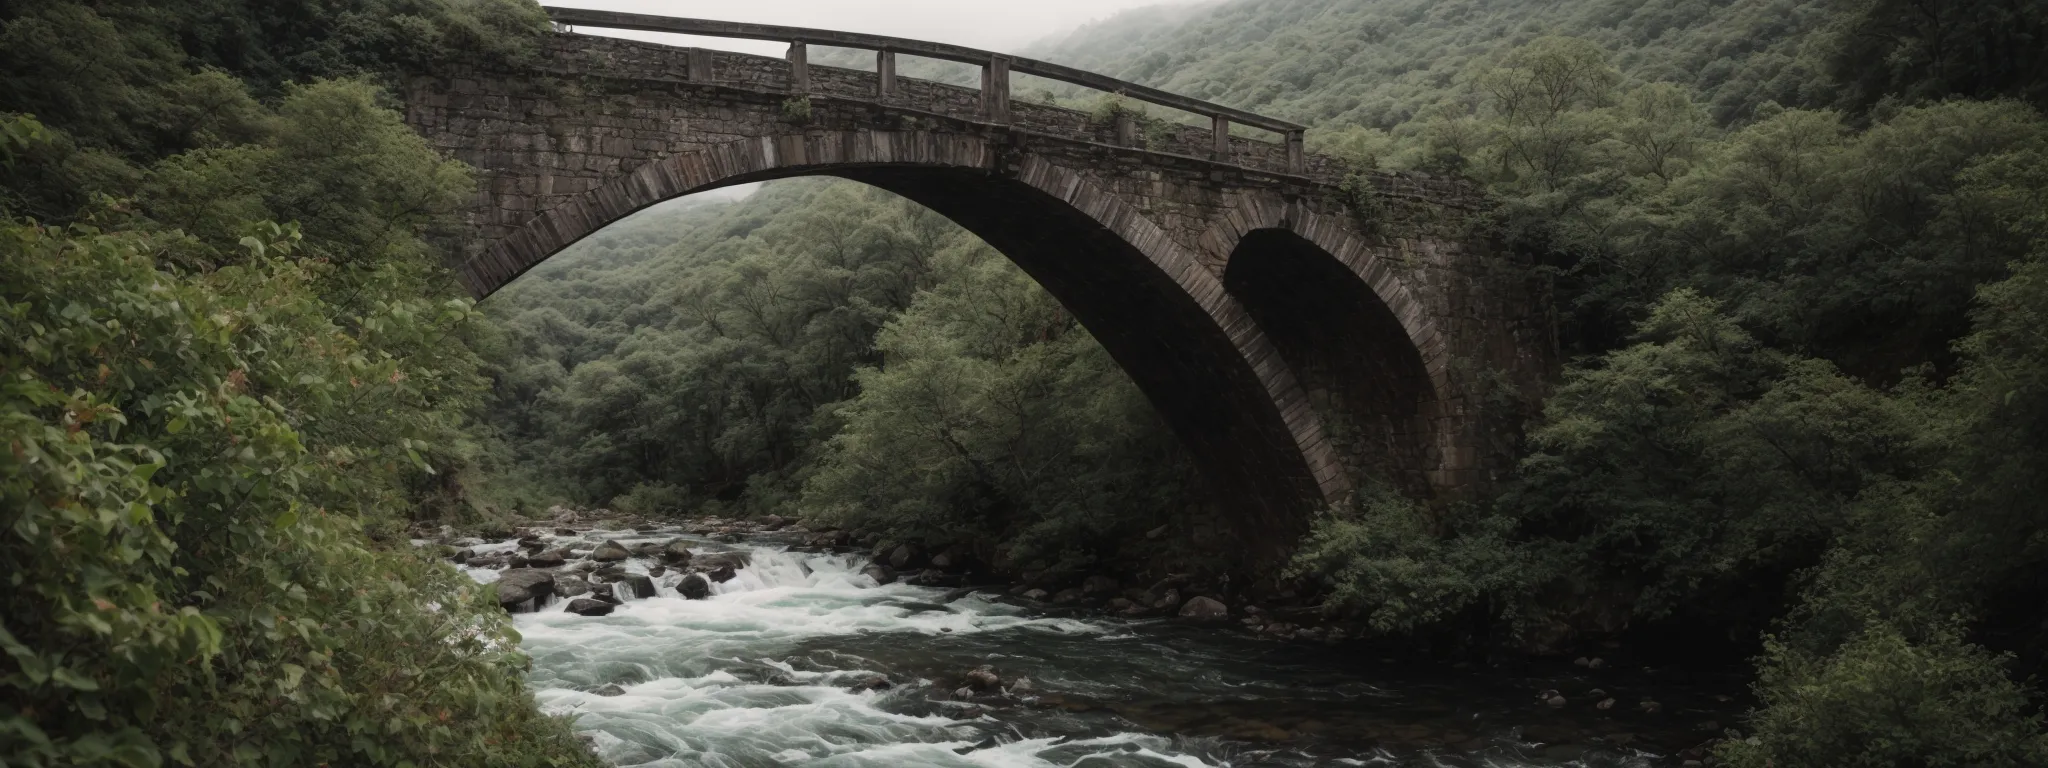 a single, sturdy bridge arching gracefully over a tumultuous river, guiding travelers safely to the opposite shore.